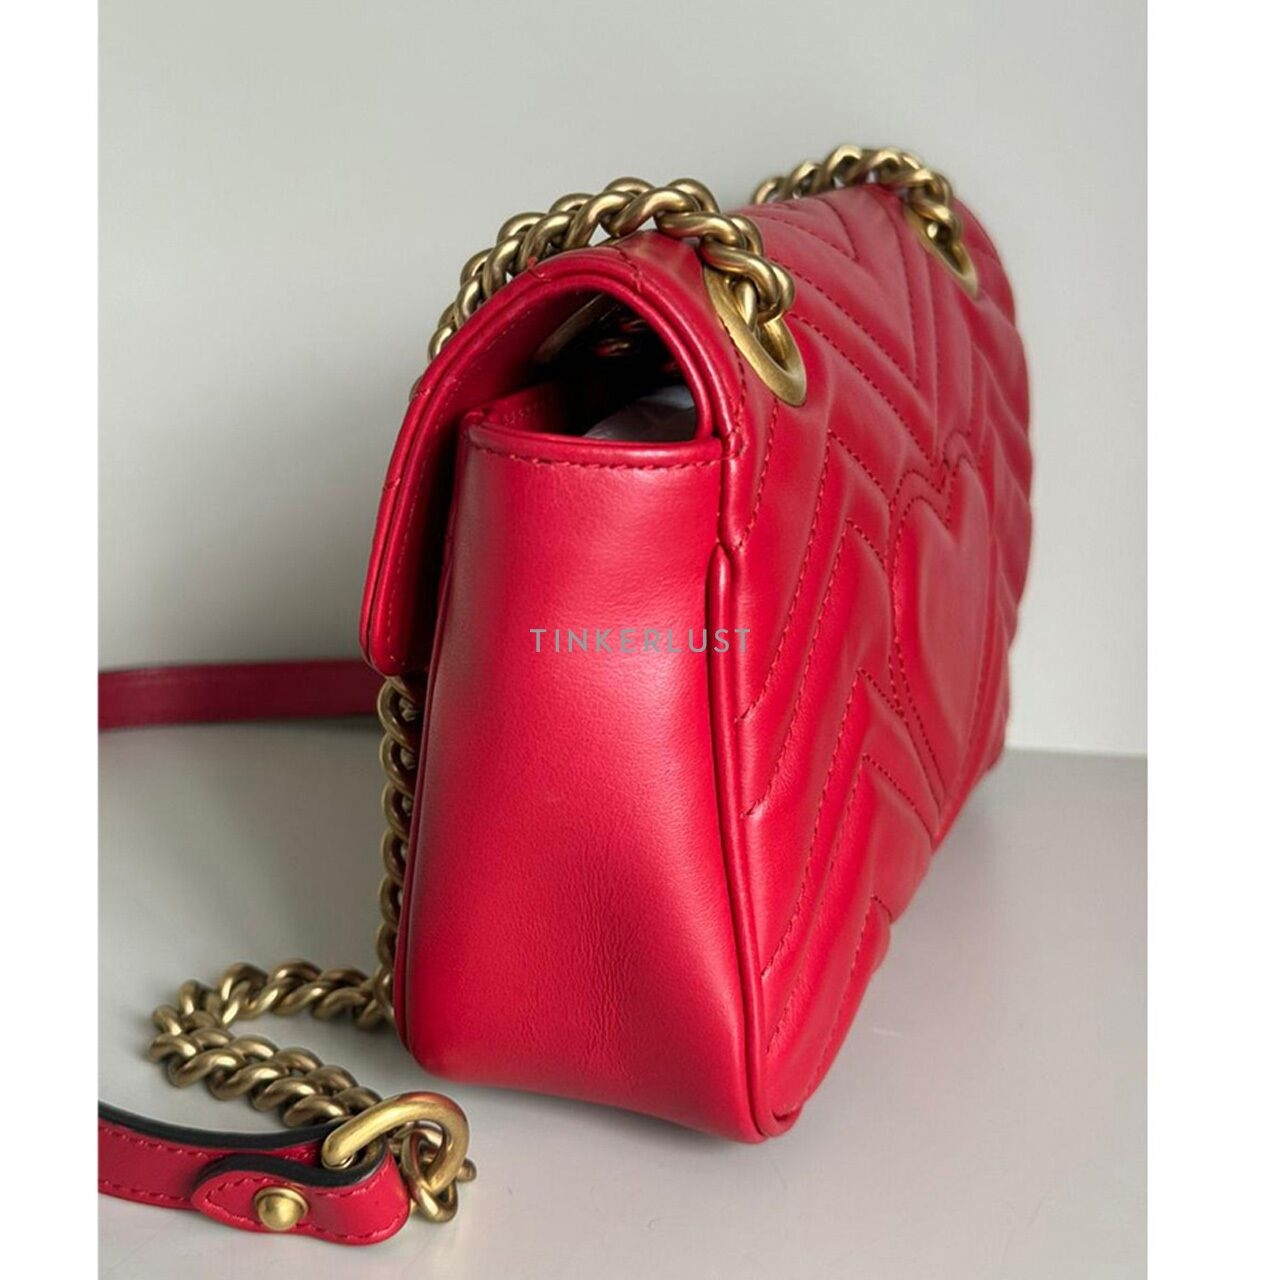 Gucci Marmont Red Mini Sling Bag